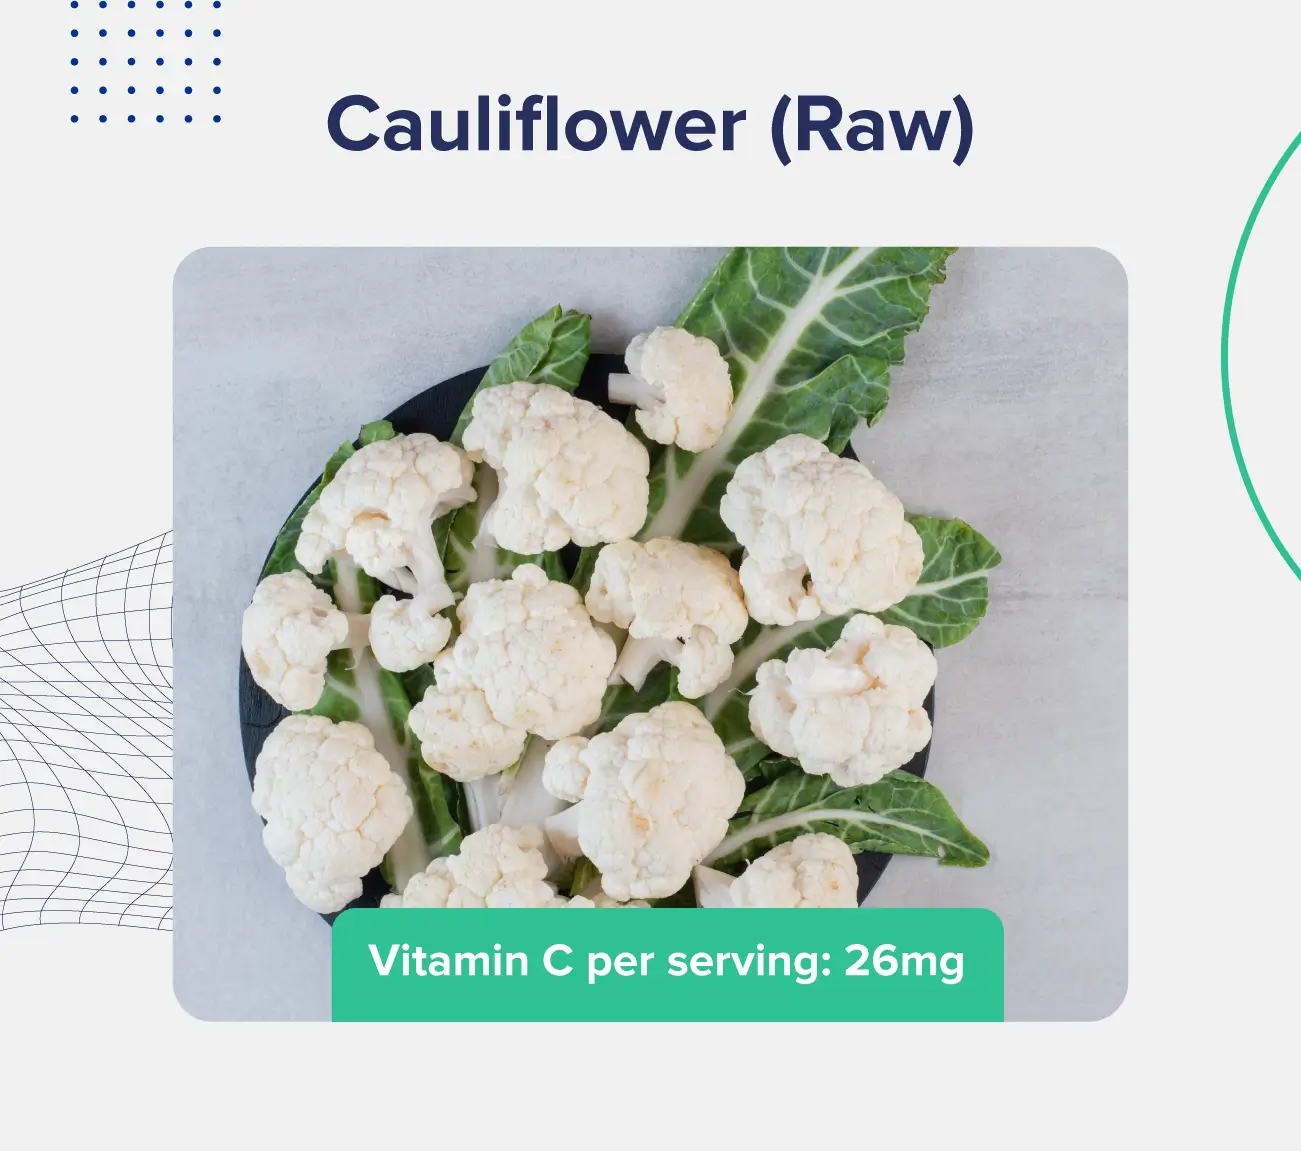 A graphic entitled "cauliflower (raw)" depicting a plate of raw cauliflower florets and a description of the vitamin C content (26 milligrams per serving) 